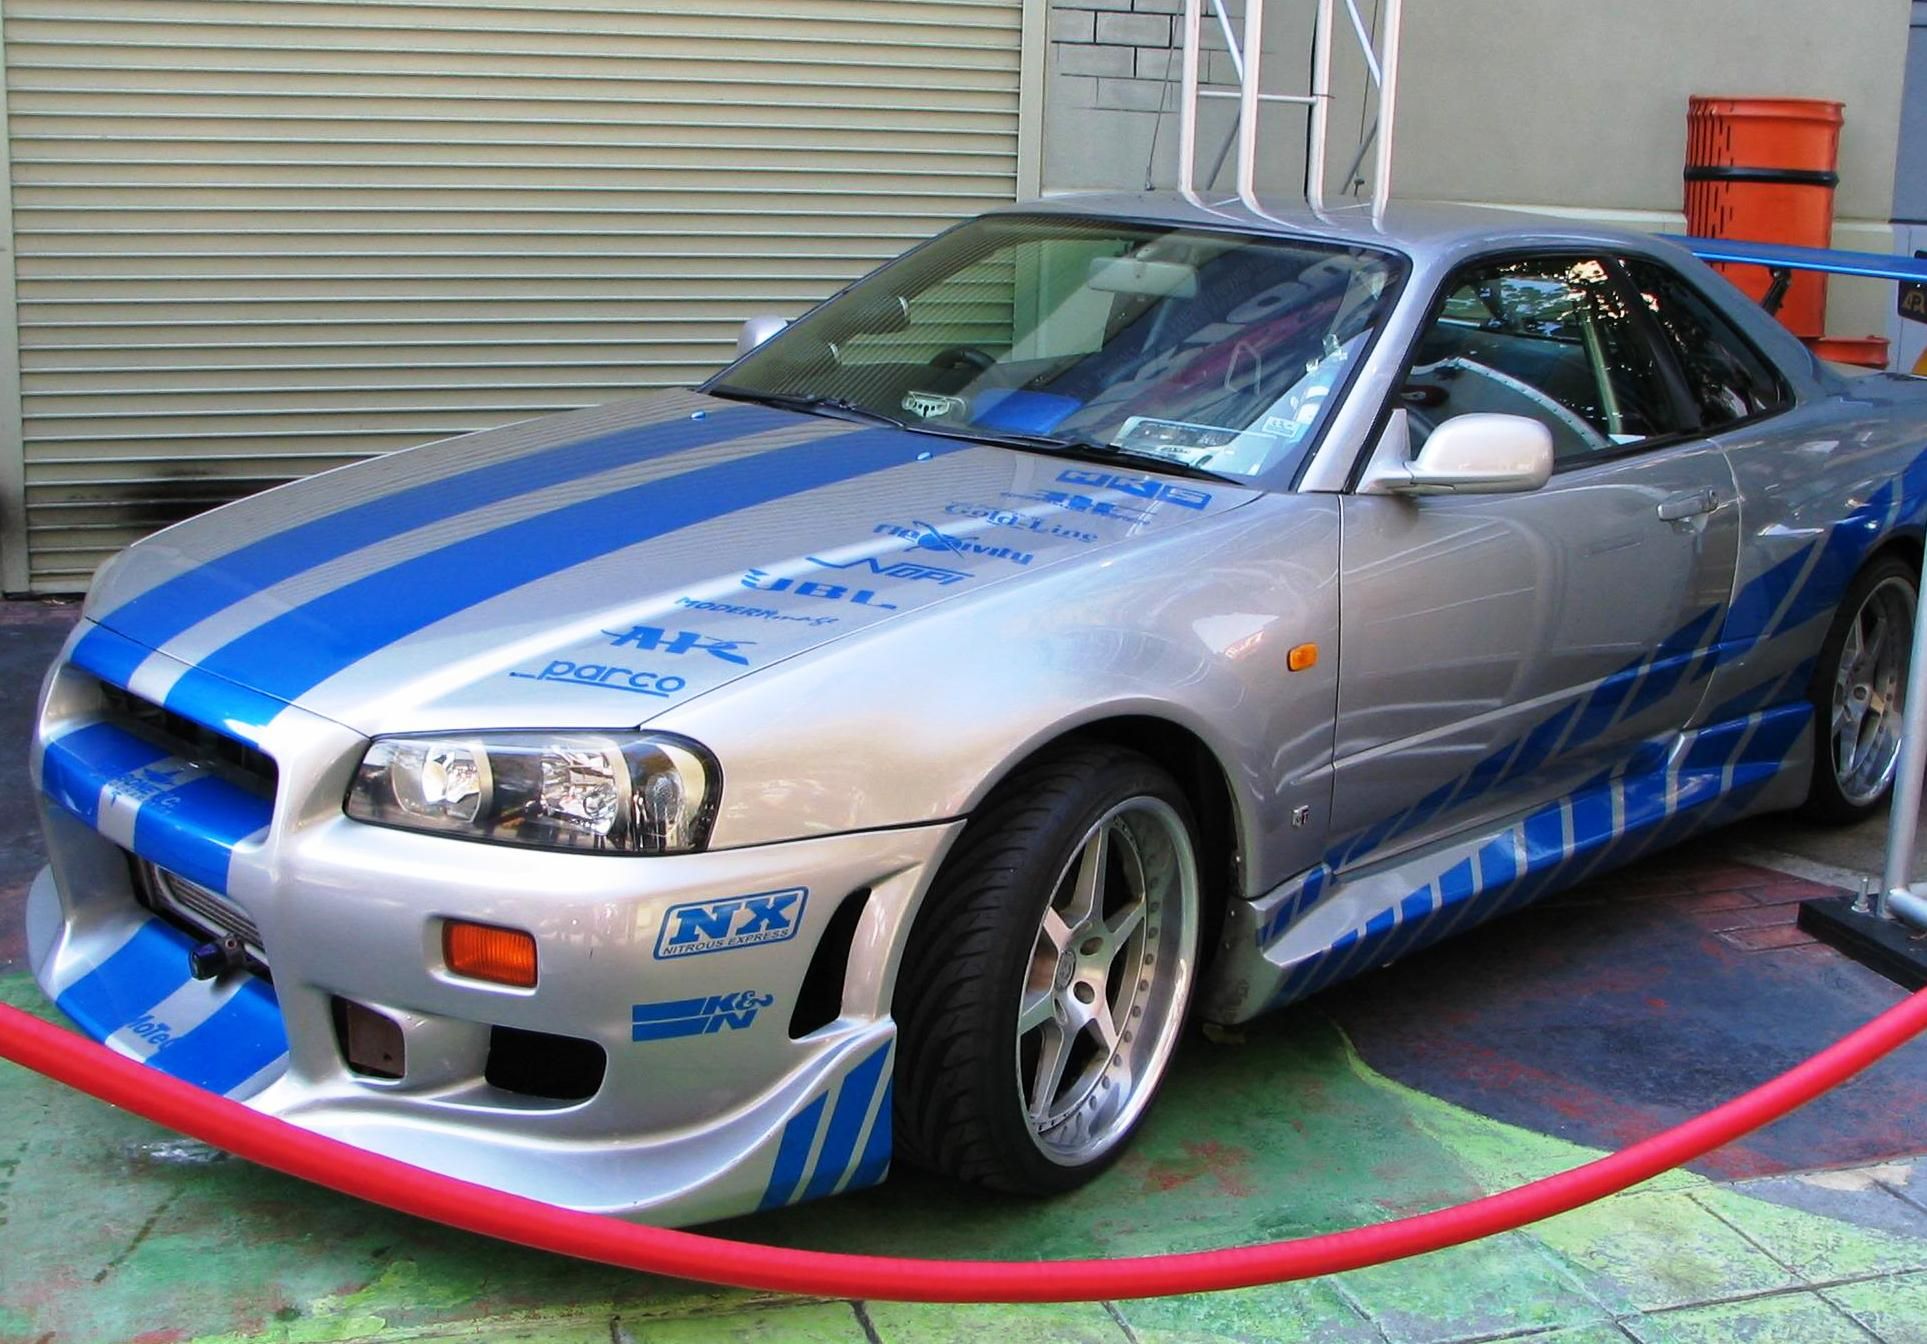 The most famous R34 in the world